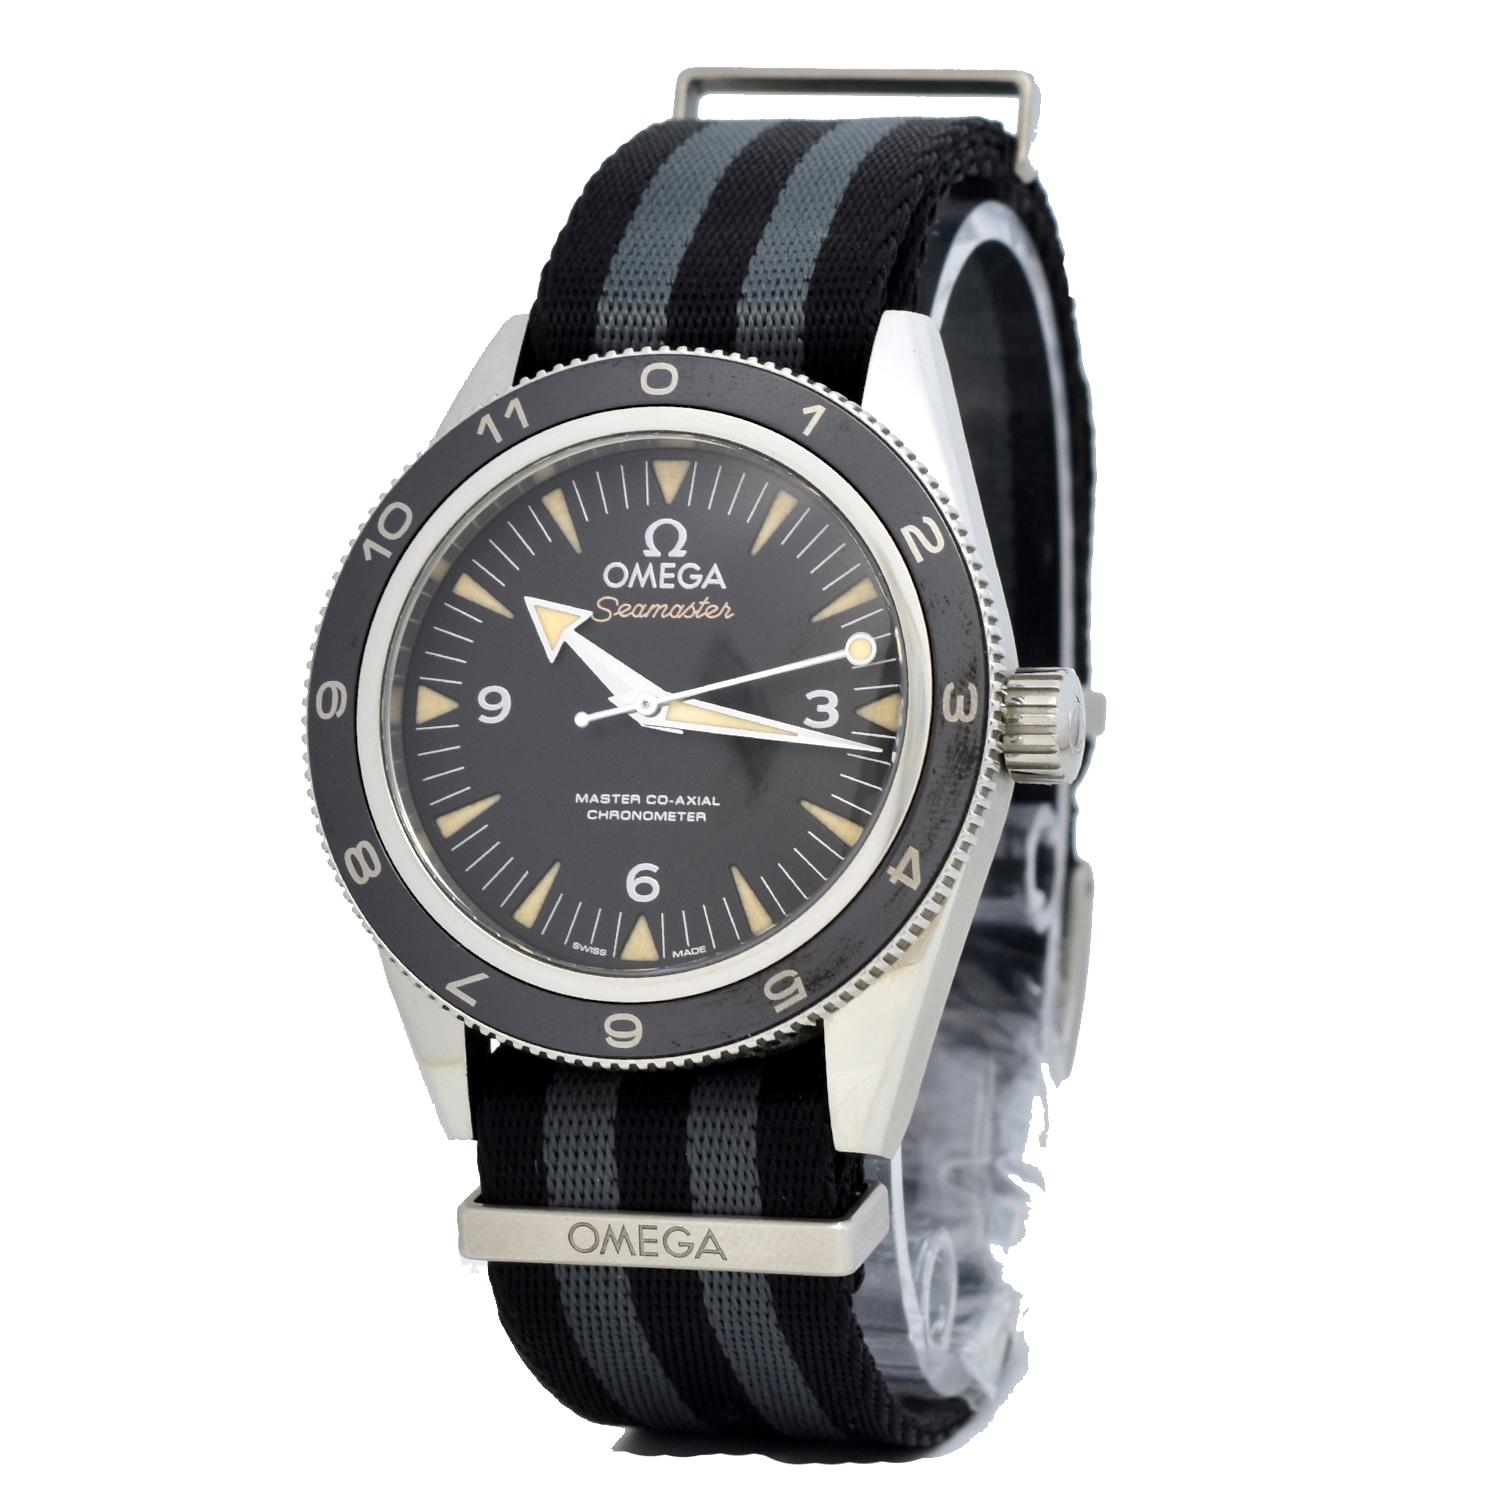 Case: 41mm steel

Dial: Black

Bracelet: Nato strap

Features: anti-magnetic, chronometer, limited edition, screw-in crown, bi-directional rotating crown, liquidmetal, transparent case black

Details: Extremely rare Omega Seamaster Spectre. This